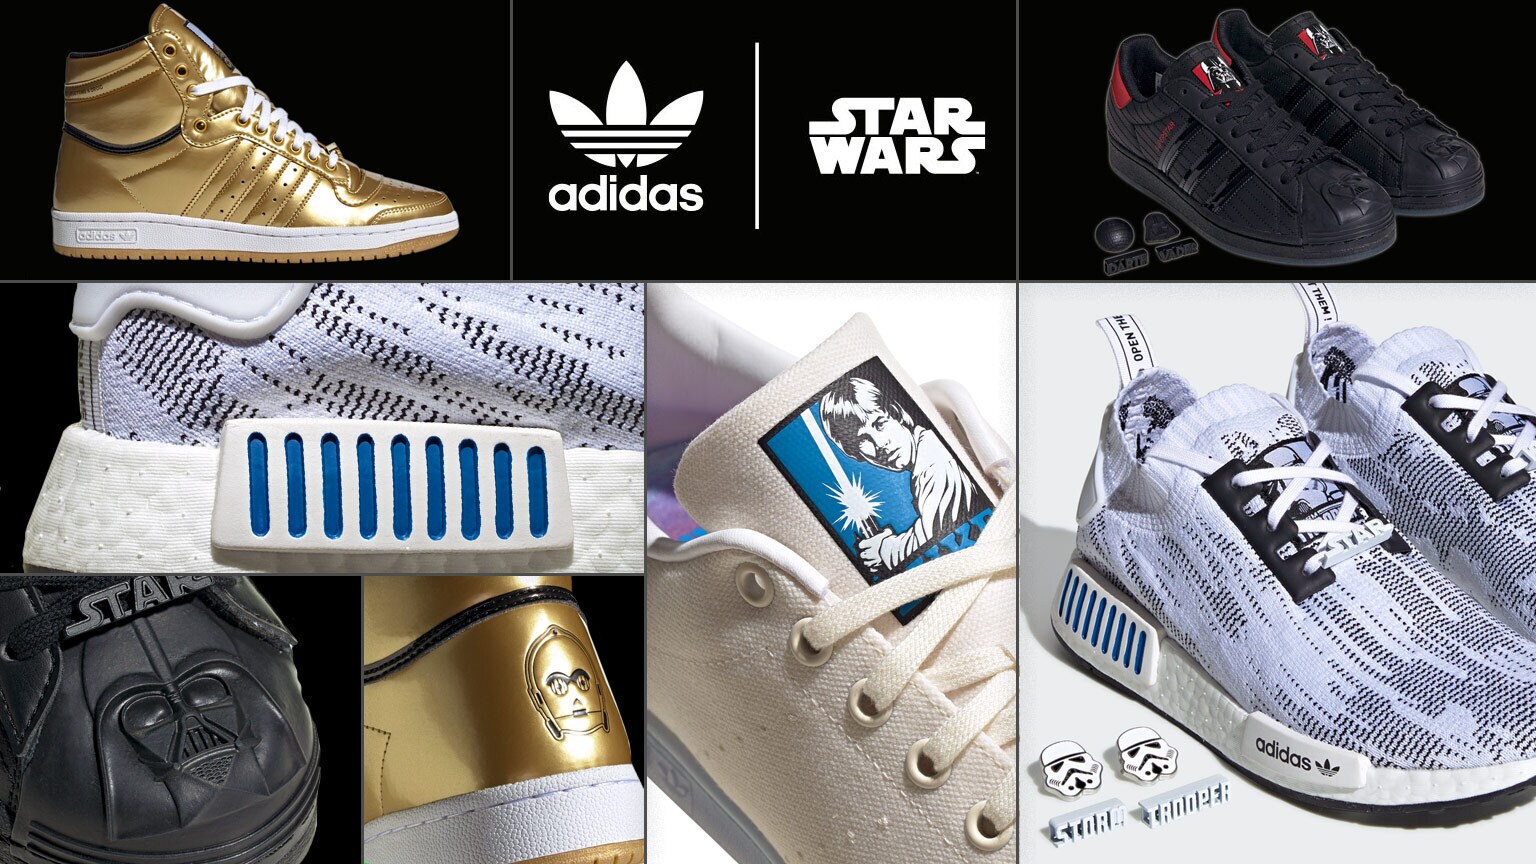 Adidas Brings Star Wars Style to its Sneaker Galaxy